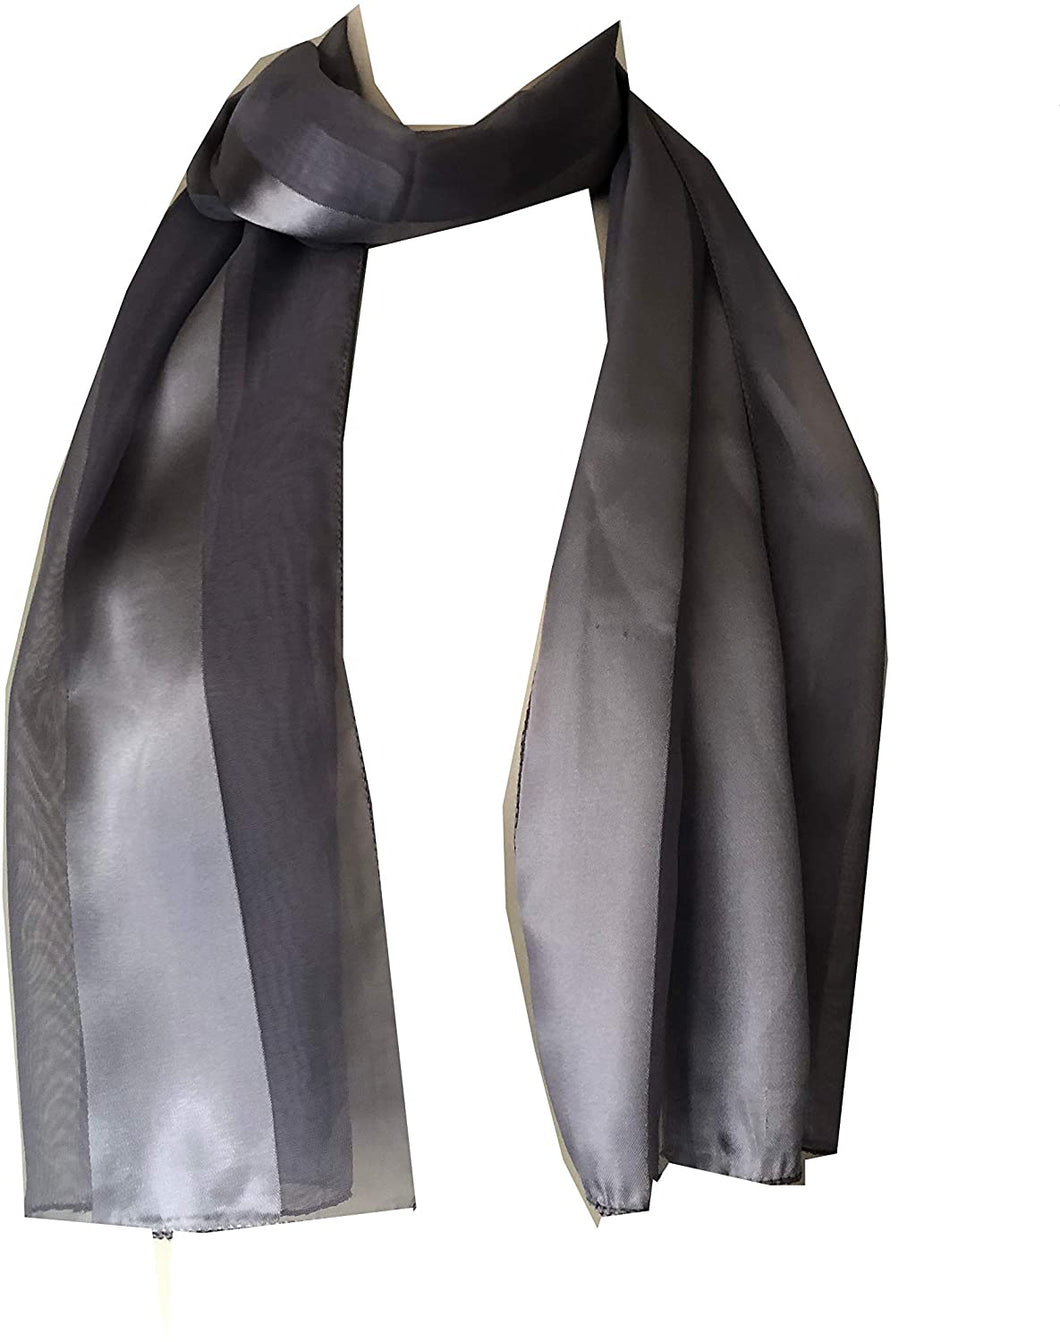 Plain Light Grey Faux Chiffon and Satin Style Striped Scarf Thin Pretty Scarf Great for Any Outfit